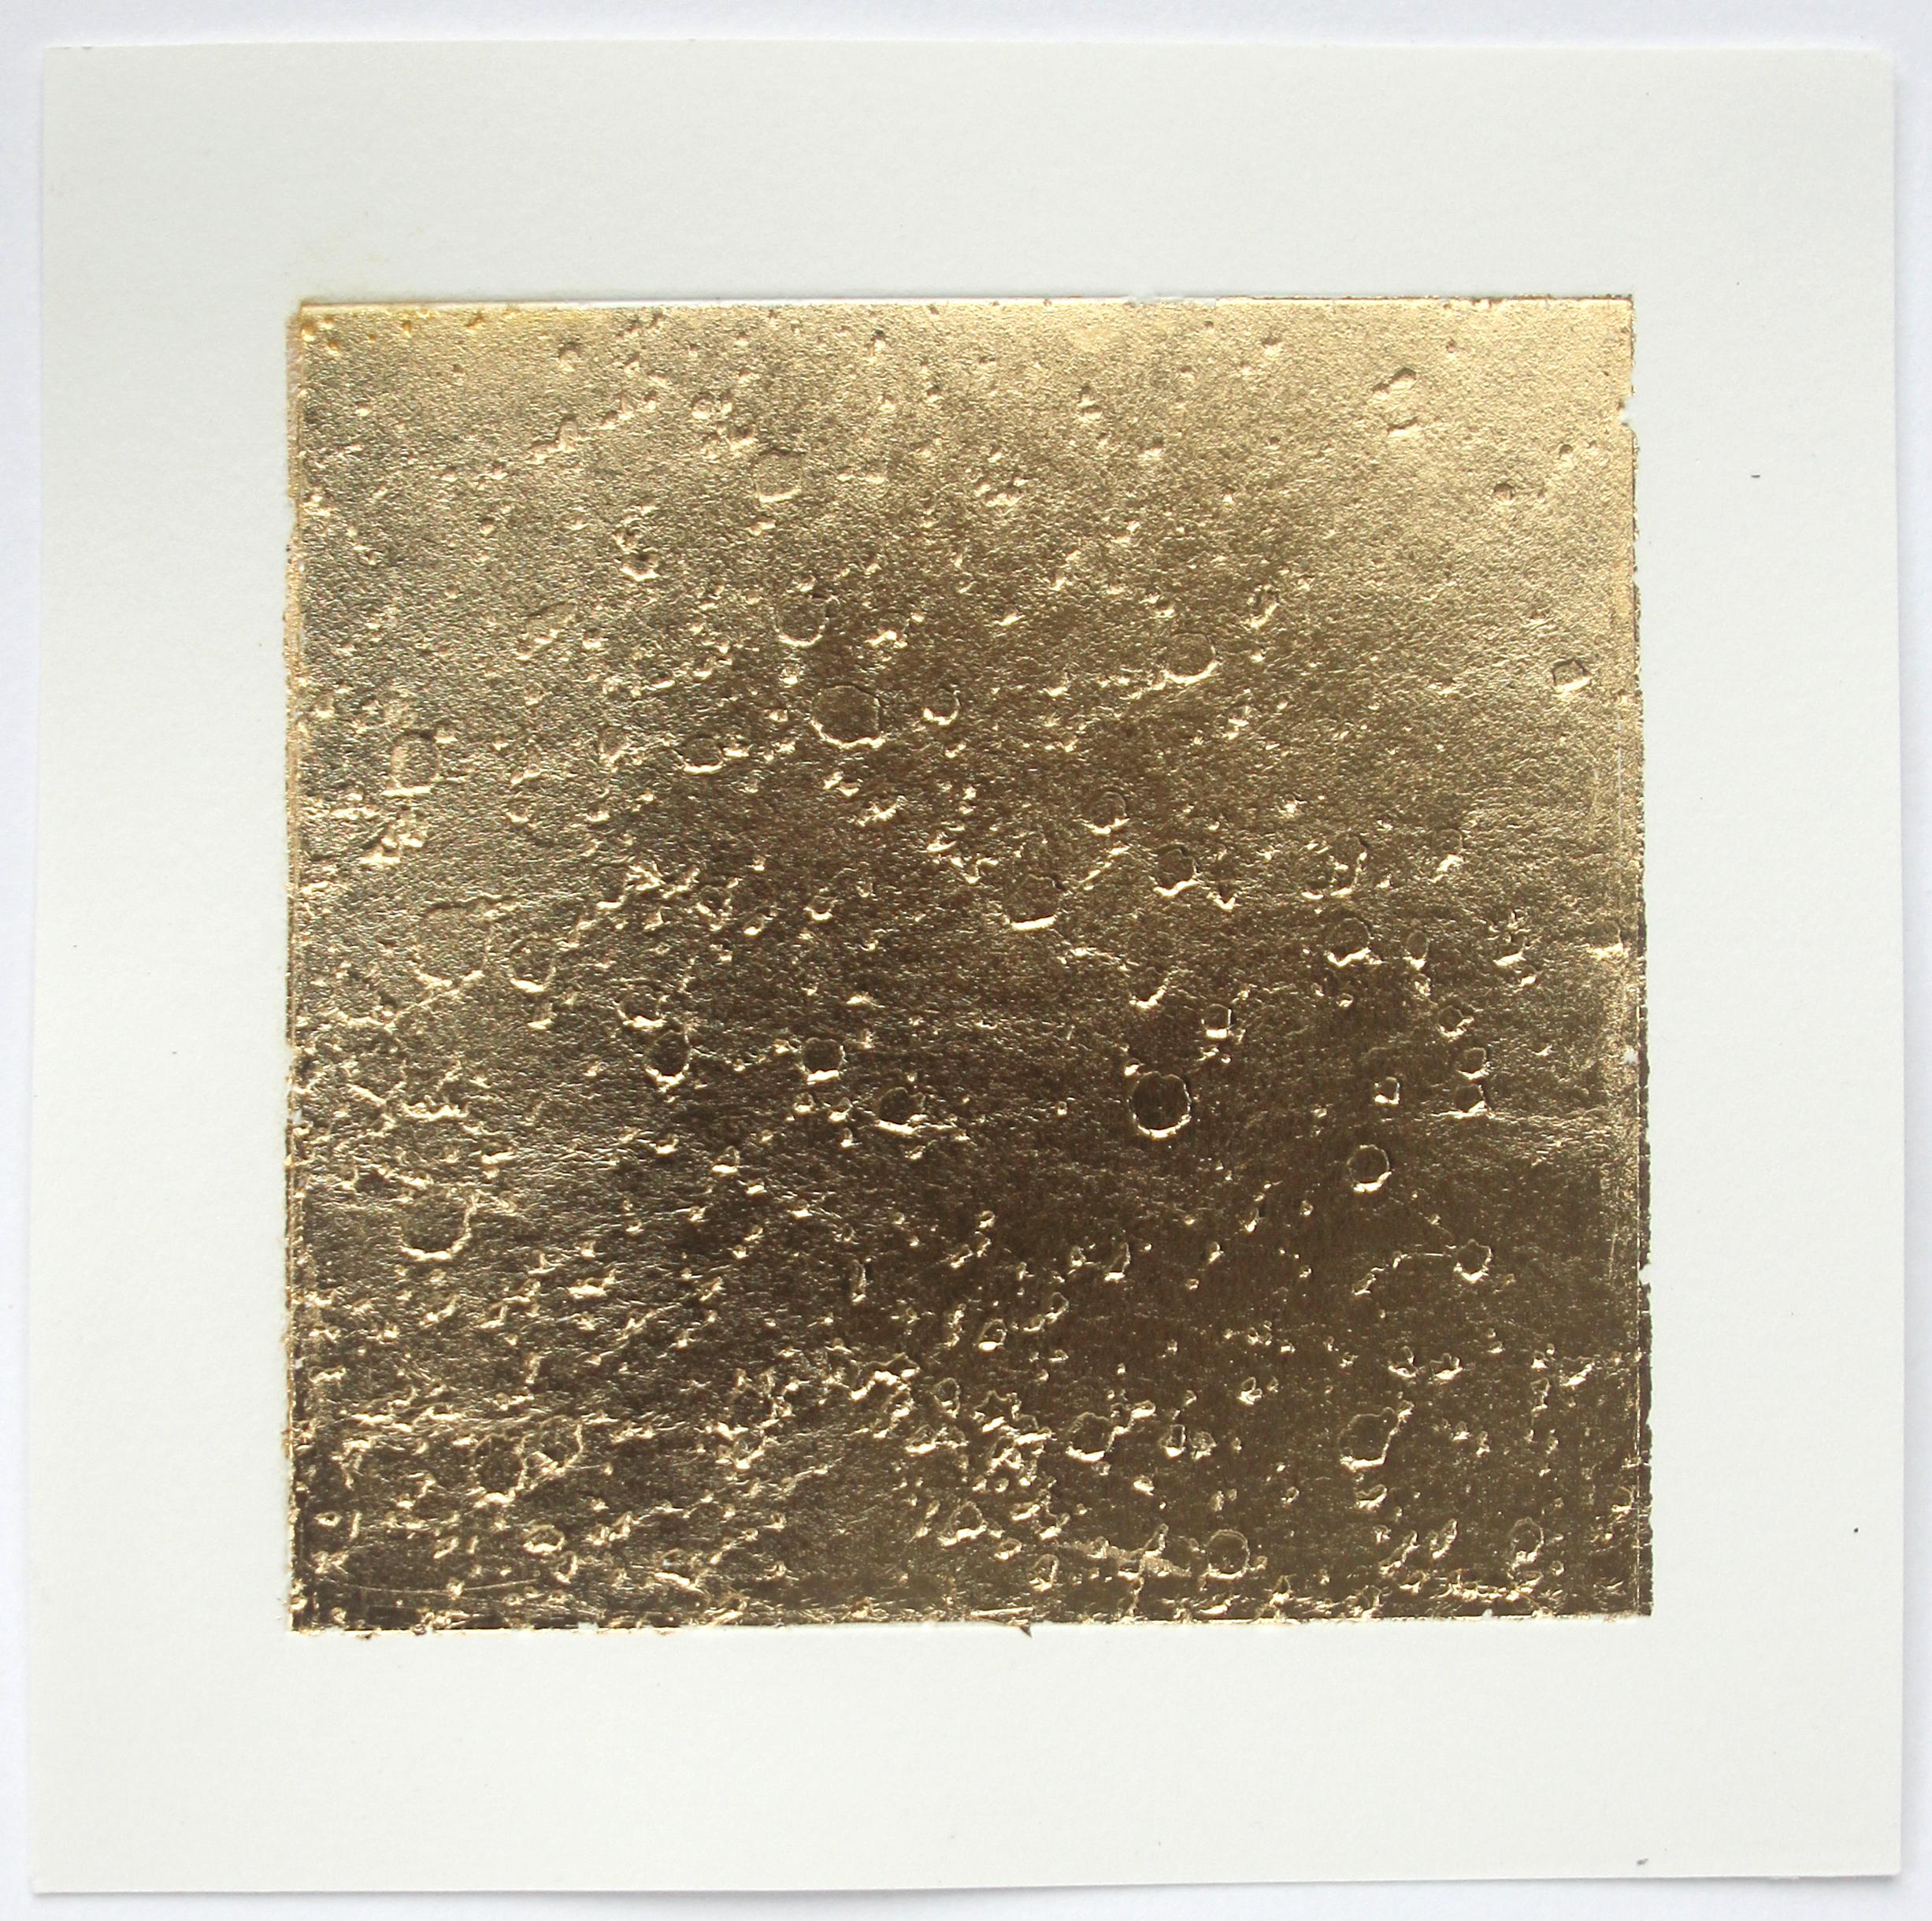 Joy is not made to be a Crumb (Set): Bubbles in the Sand, Hand-Pulled Etching - Conceptual Print by Jayne Wilton